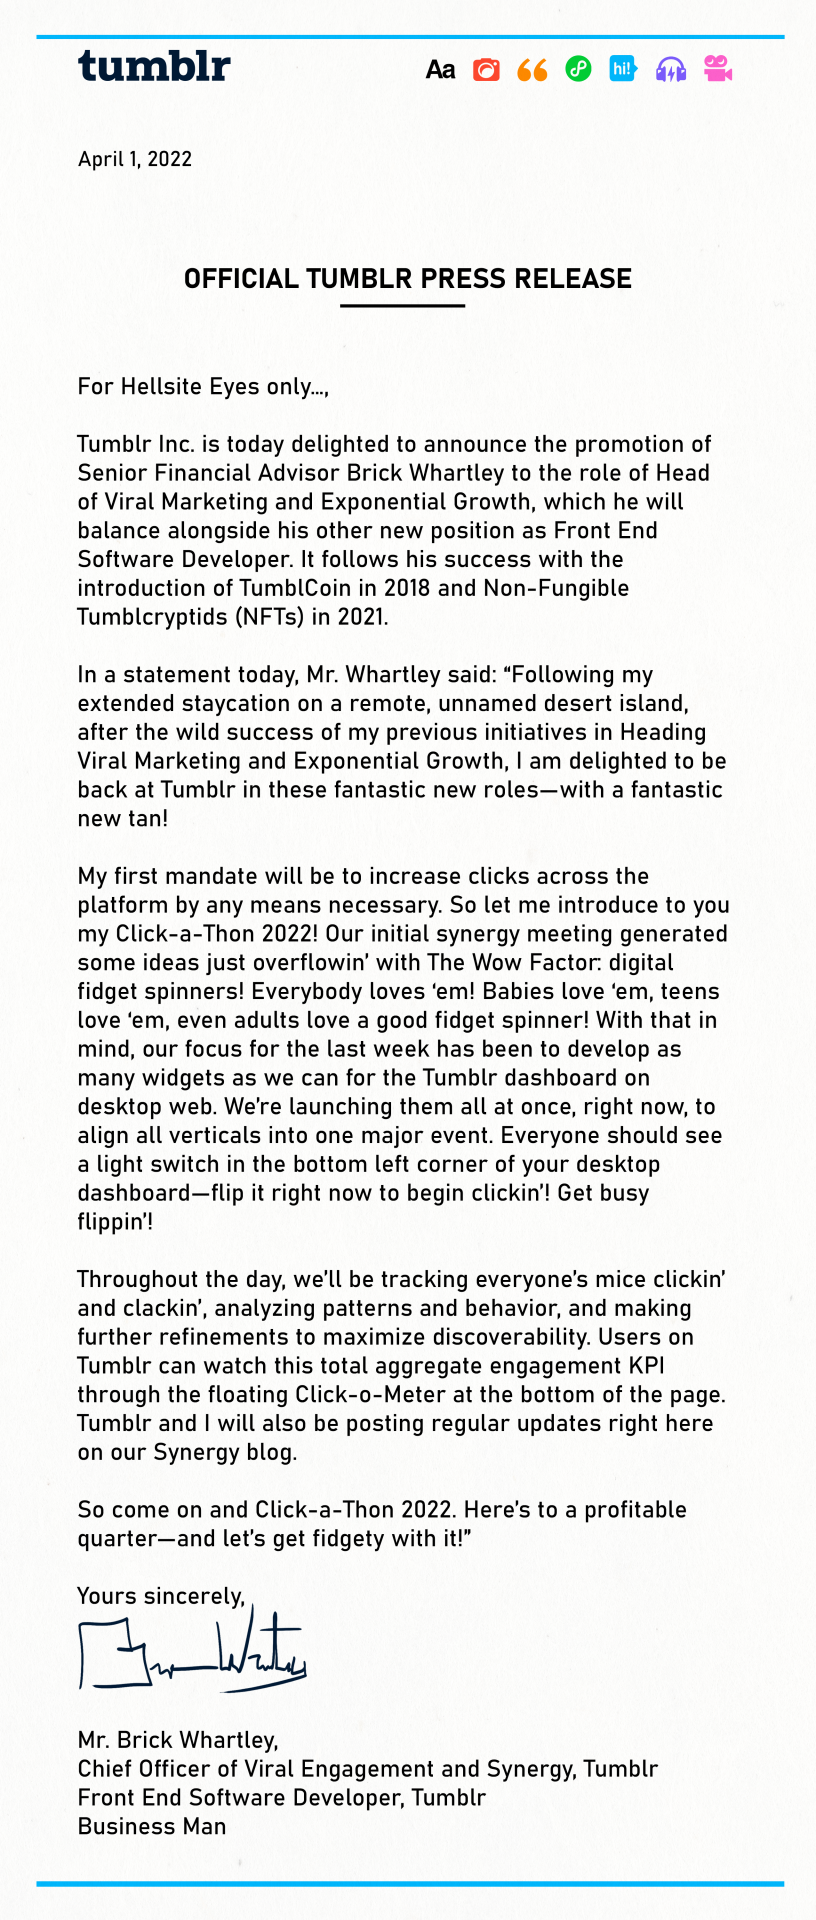 OFFICIAL TUMBLR PRESS RELEASE  For Hellsite Eyes only…,  Tumblr Inc. is today delighted to announce the promotion of Senior Financial Advisor Brick Whartley to the role of Head of Viral Marketing and Exponential Growth, which he will balance alongside his other new position as Front End Software Developer. It follows his success with the introduction of TumblCoin in 2018 and Non-Fungible Tumblcryptids (NFTs) in 2021.   * In a statement today, Mr. Whartley said: “Following my extended staycation on a remote, unnamed desert island, after the wild success of my previous initiatives in Heading Viral Marketing and Exponential Growth, I am delighted to be back at Tumblr in these fantastic new roles—with a fantastic new tan!   My first mandate will be to increase clicks across the platform by any means necessary. So let me introduce to you my Click-a-Thon 2022! Our initial synergy meeting generated some ideas just overflowin’ with The Wow Factor: digital fidget spinners! Everybody loves ‘em! Babies love ‘em, teens love ‘em, even adults love a good fidget spinner! With that in mind, our focus for the last week has been to develop as many widgets as we can for the Tumblr dashboard on desktop web. We’re launching them all at once, right now, to align all verticals into one major event. Everyone should see a light switch in the corner of your desktop dashboard—flip it right now to begin clickin’! Get busy flippin’!  Throughout the day, we’ll be tracking everyone’s mice clickin’ and clackin’, analyzing patterns and behavior, and making further refinements to maximize discoverability. Users on Tumblr can watch this total aggregate engagement KPI through the floating Click-o-Meter at the bottom of the page. Tumblr and I will also be posting regular updates right here on our Synergy blog.   So come on and Click-a-Thon 2022. Here’s to a profitable quarter—and let’s get fidgety with it!”  Yours sincerely,   Mr. Brick Whartley, * Chief Officer of Viral Engagement and Synergy, Tumblr Front End Software Developer, Tumblr Business Man